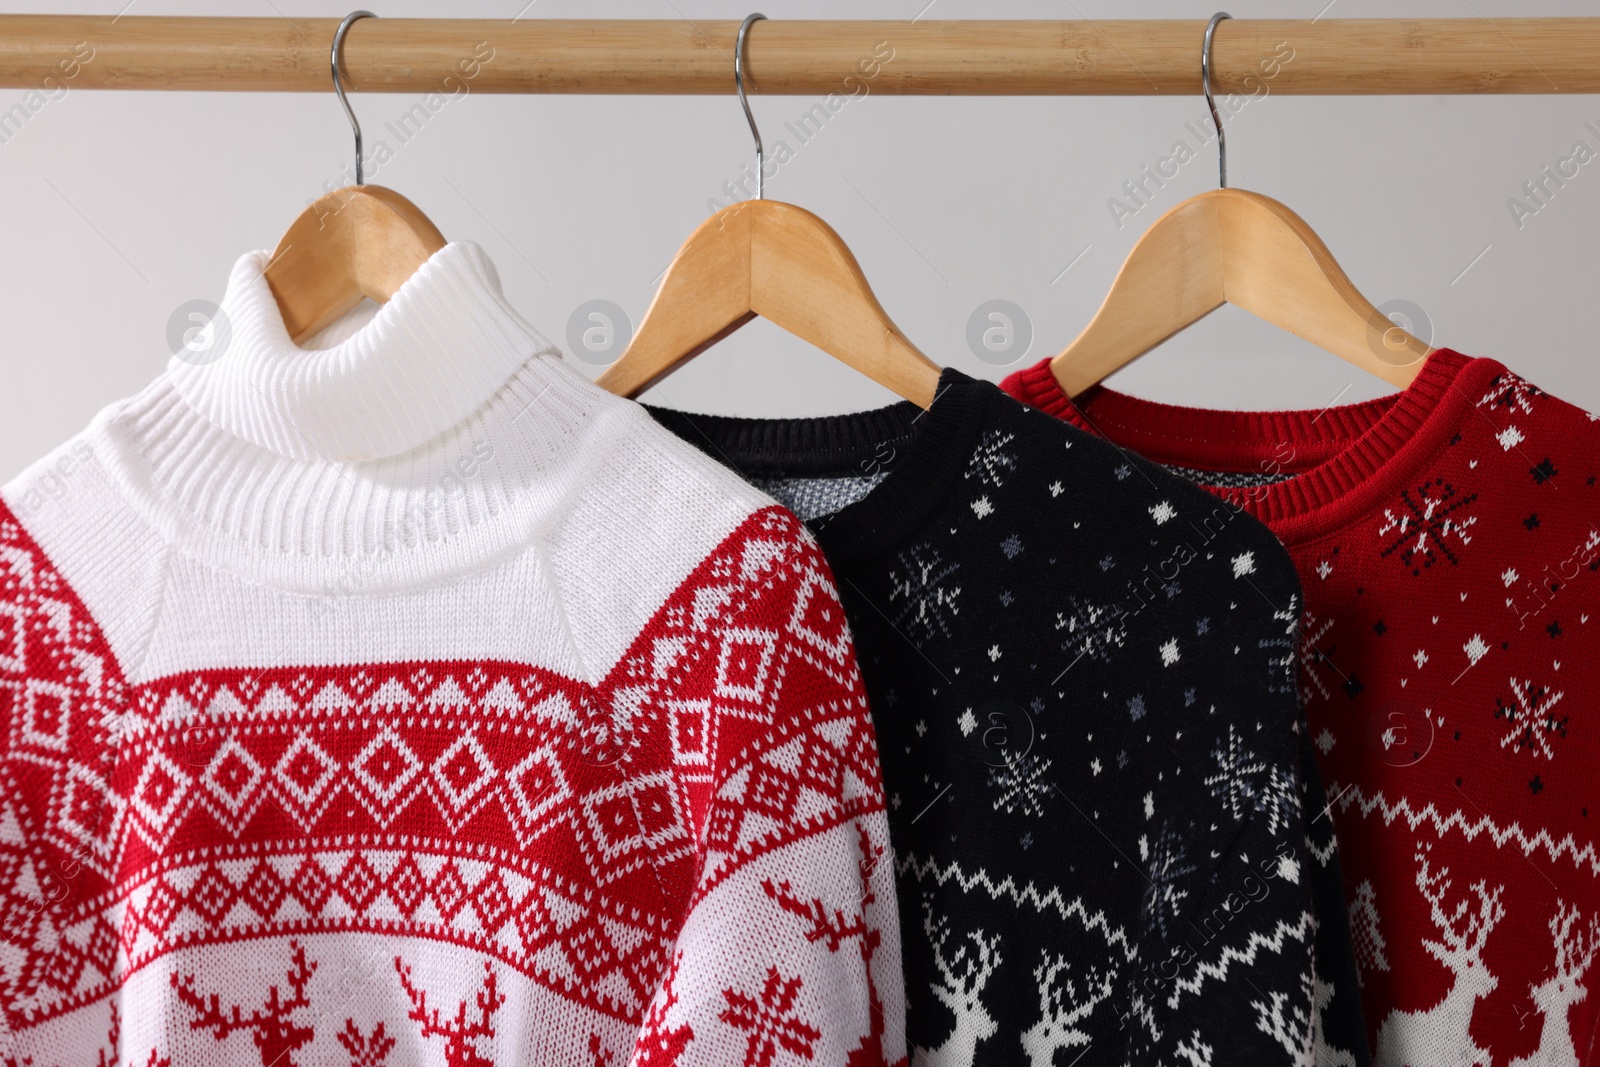 Photo of Different Christmas sweaters hanging on rack against light background, closeup